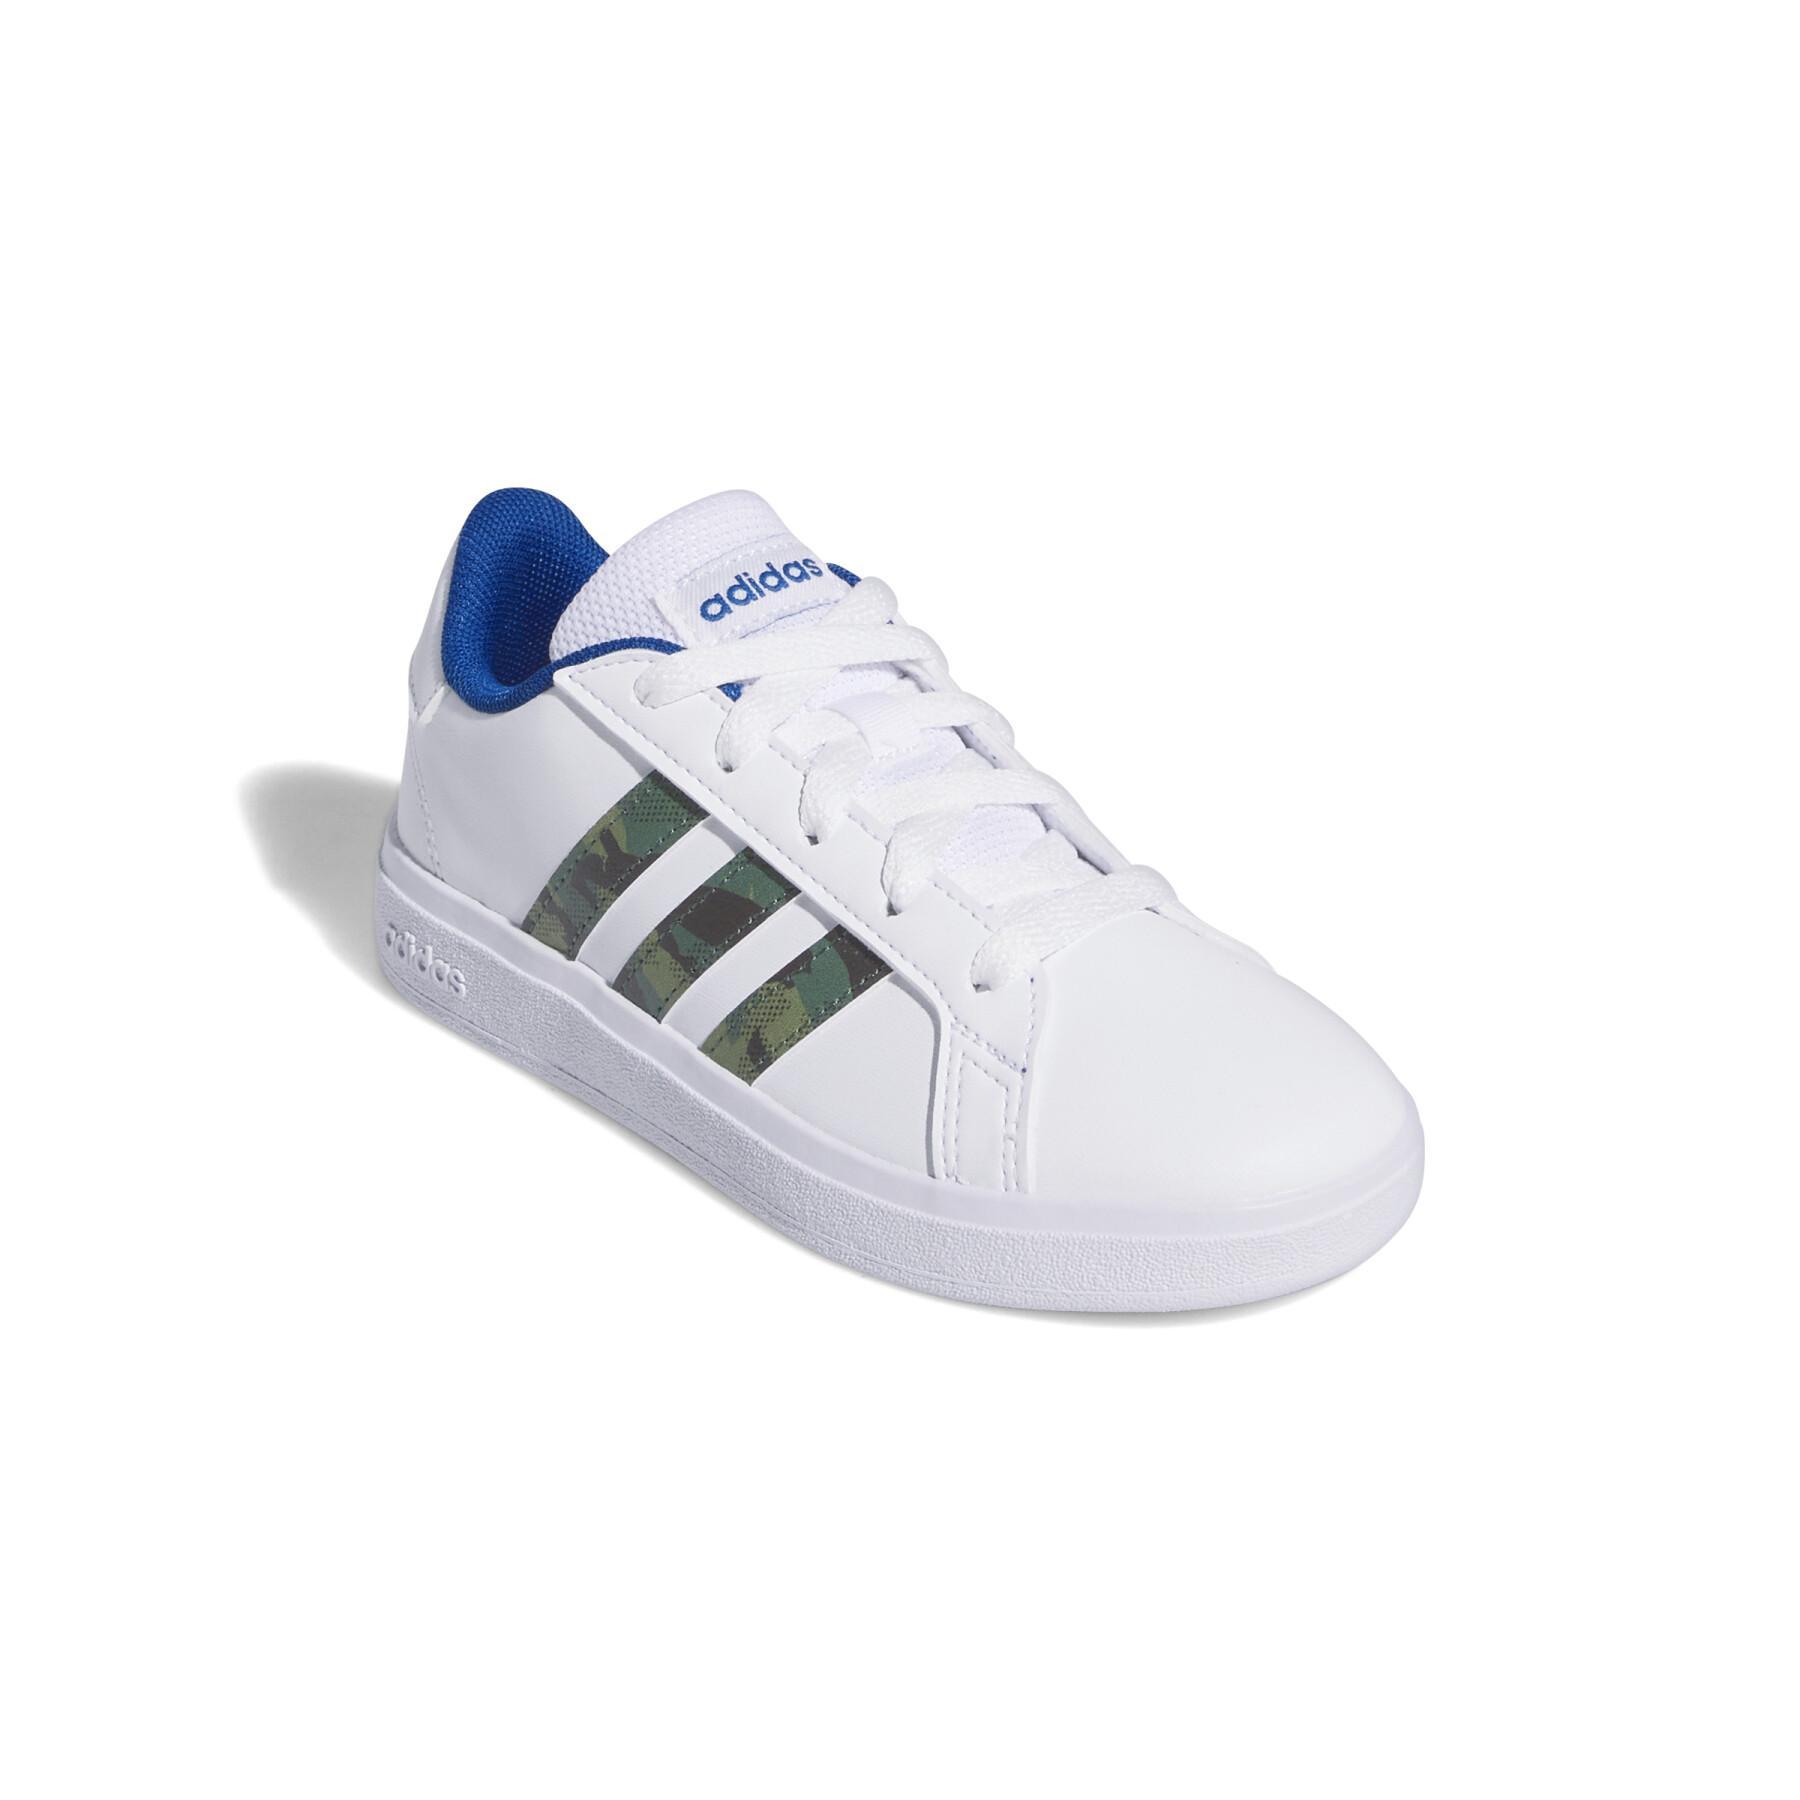 Children's large court lace-up sneakers adidas